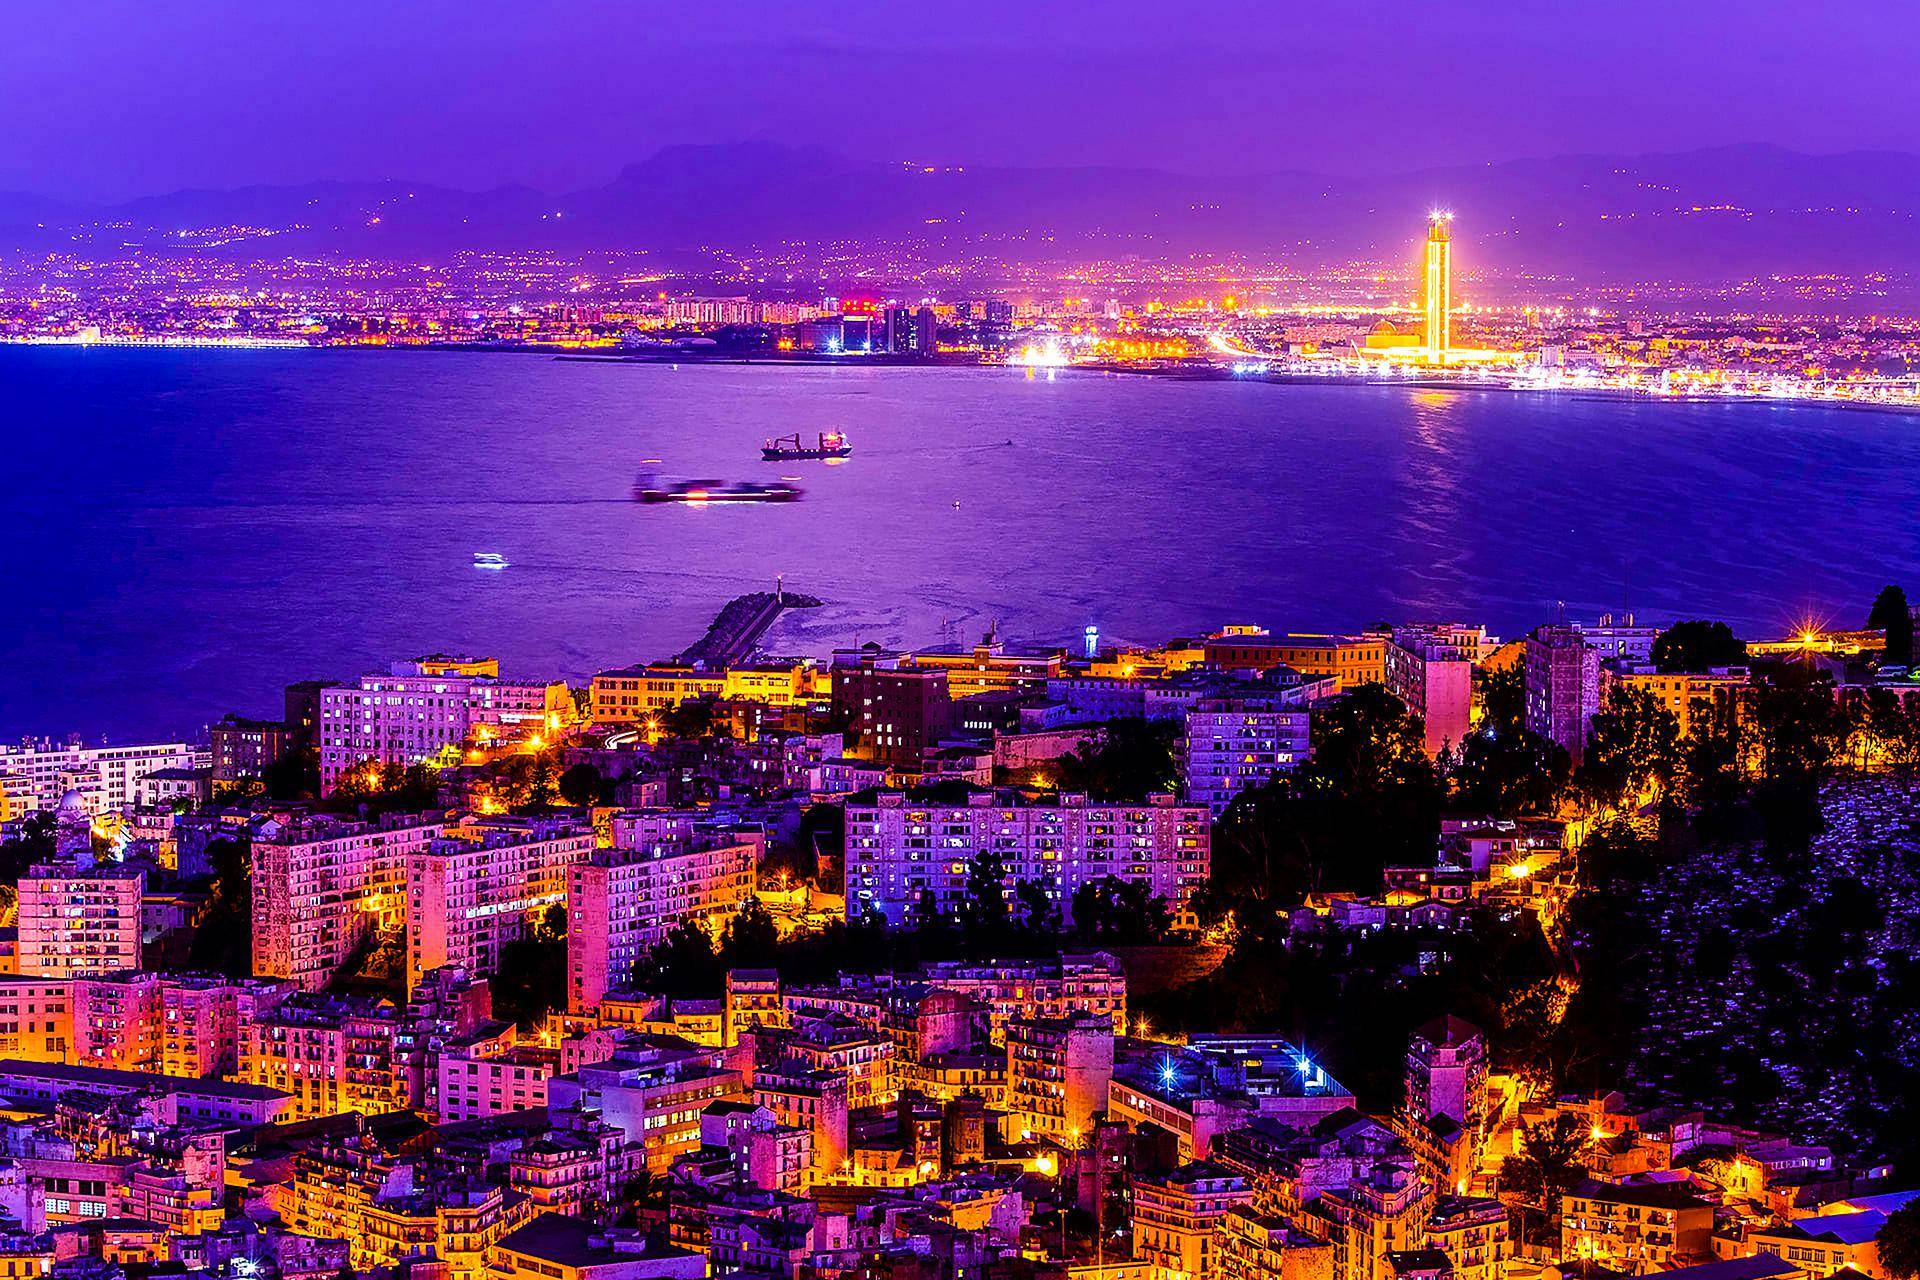 <span  class="uc_style_uc_tiles_grid_image_elementor_uc_items_attribute_title" style="color:#ffffff;">Alger - By Night</span>